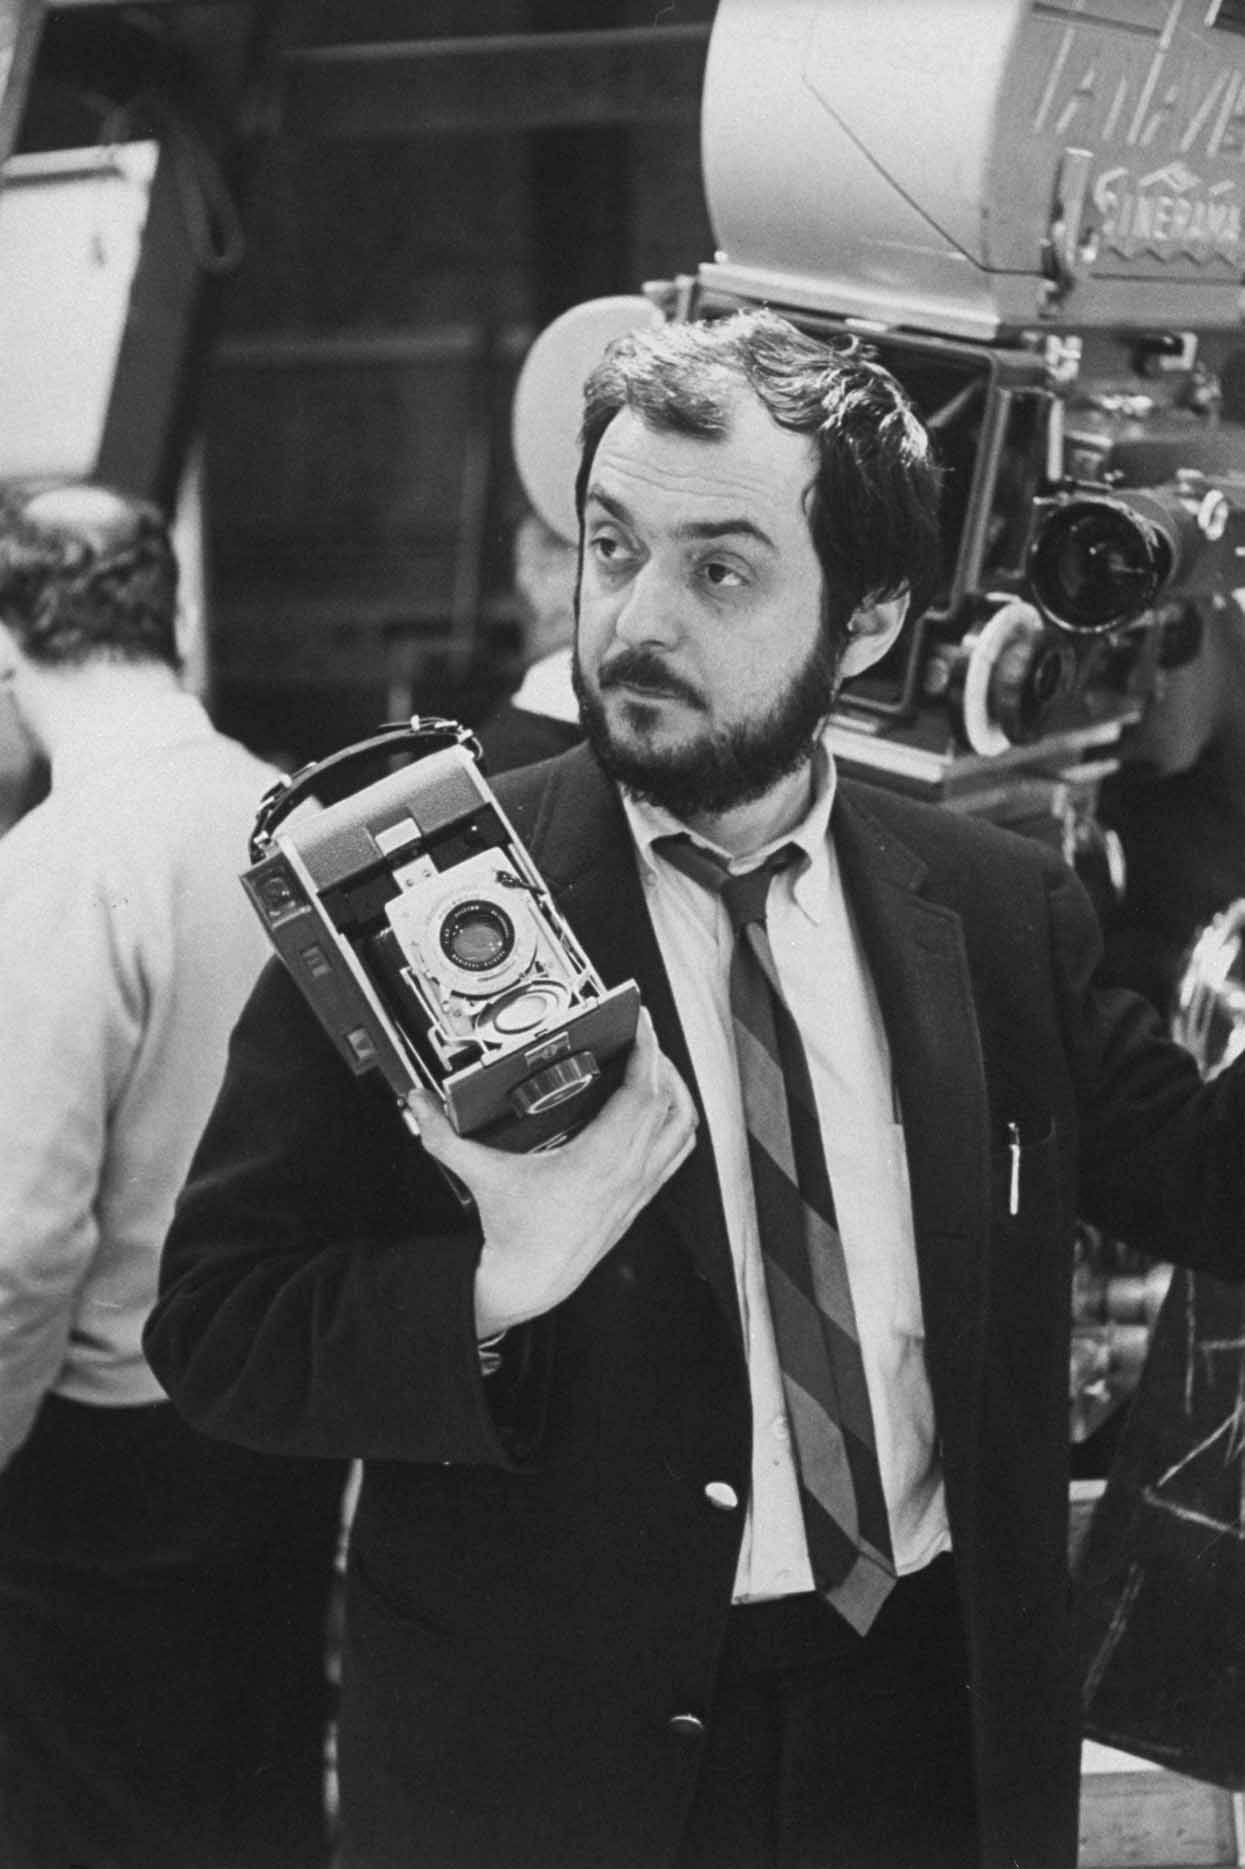 Film director Stanley Kubrick holding polaroid camera during the filming of his movie "2001: A Space Odyssey".